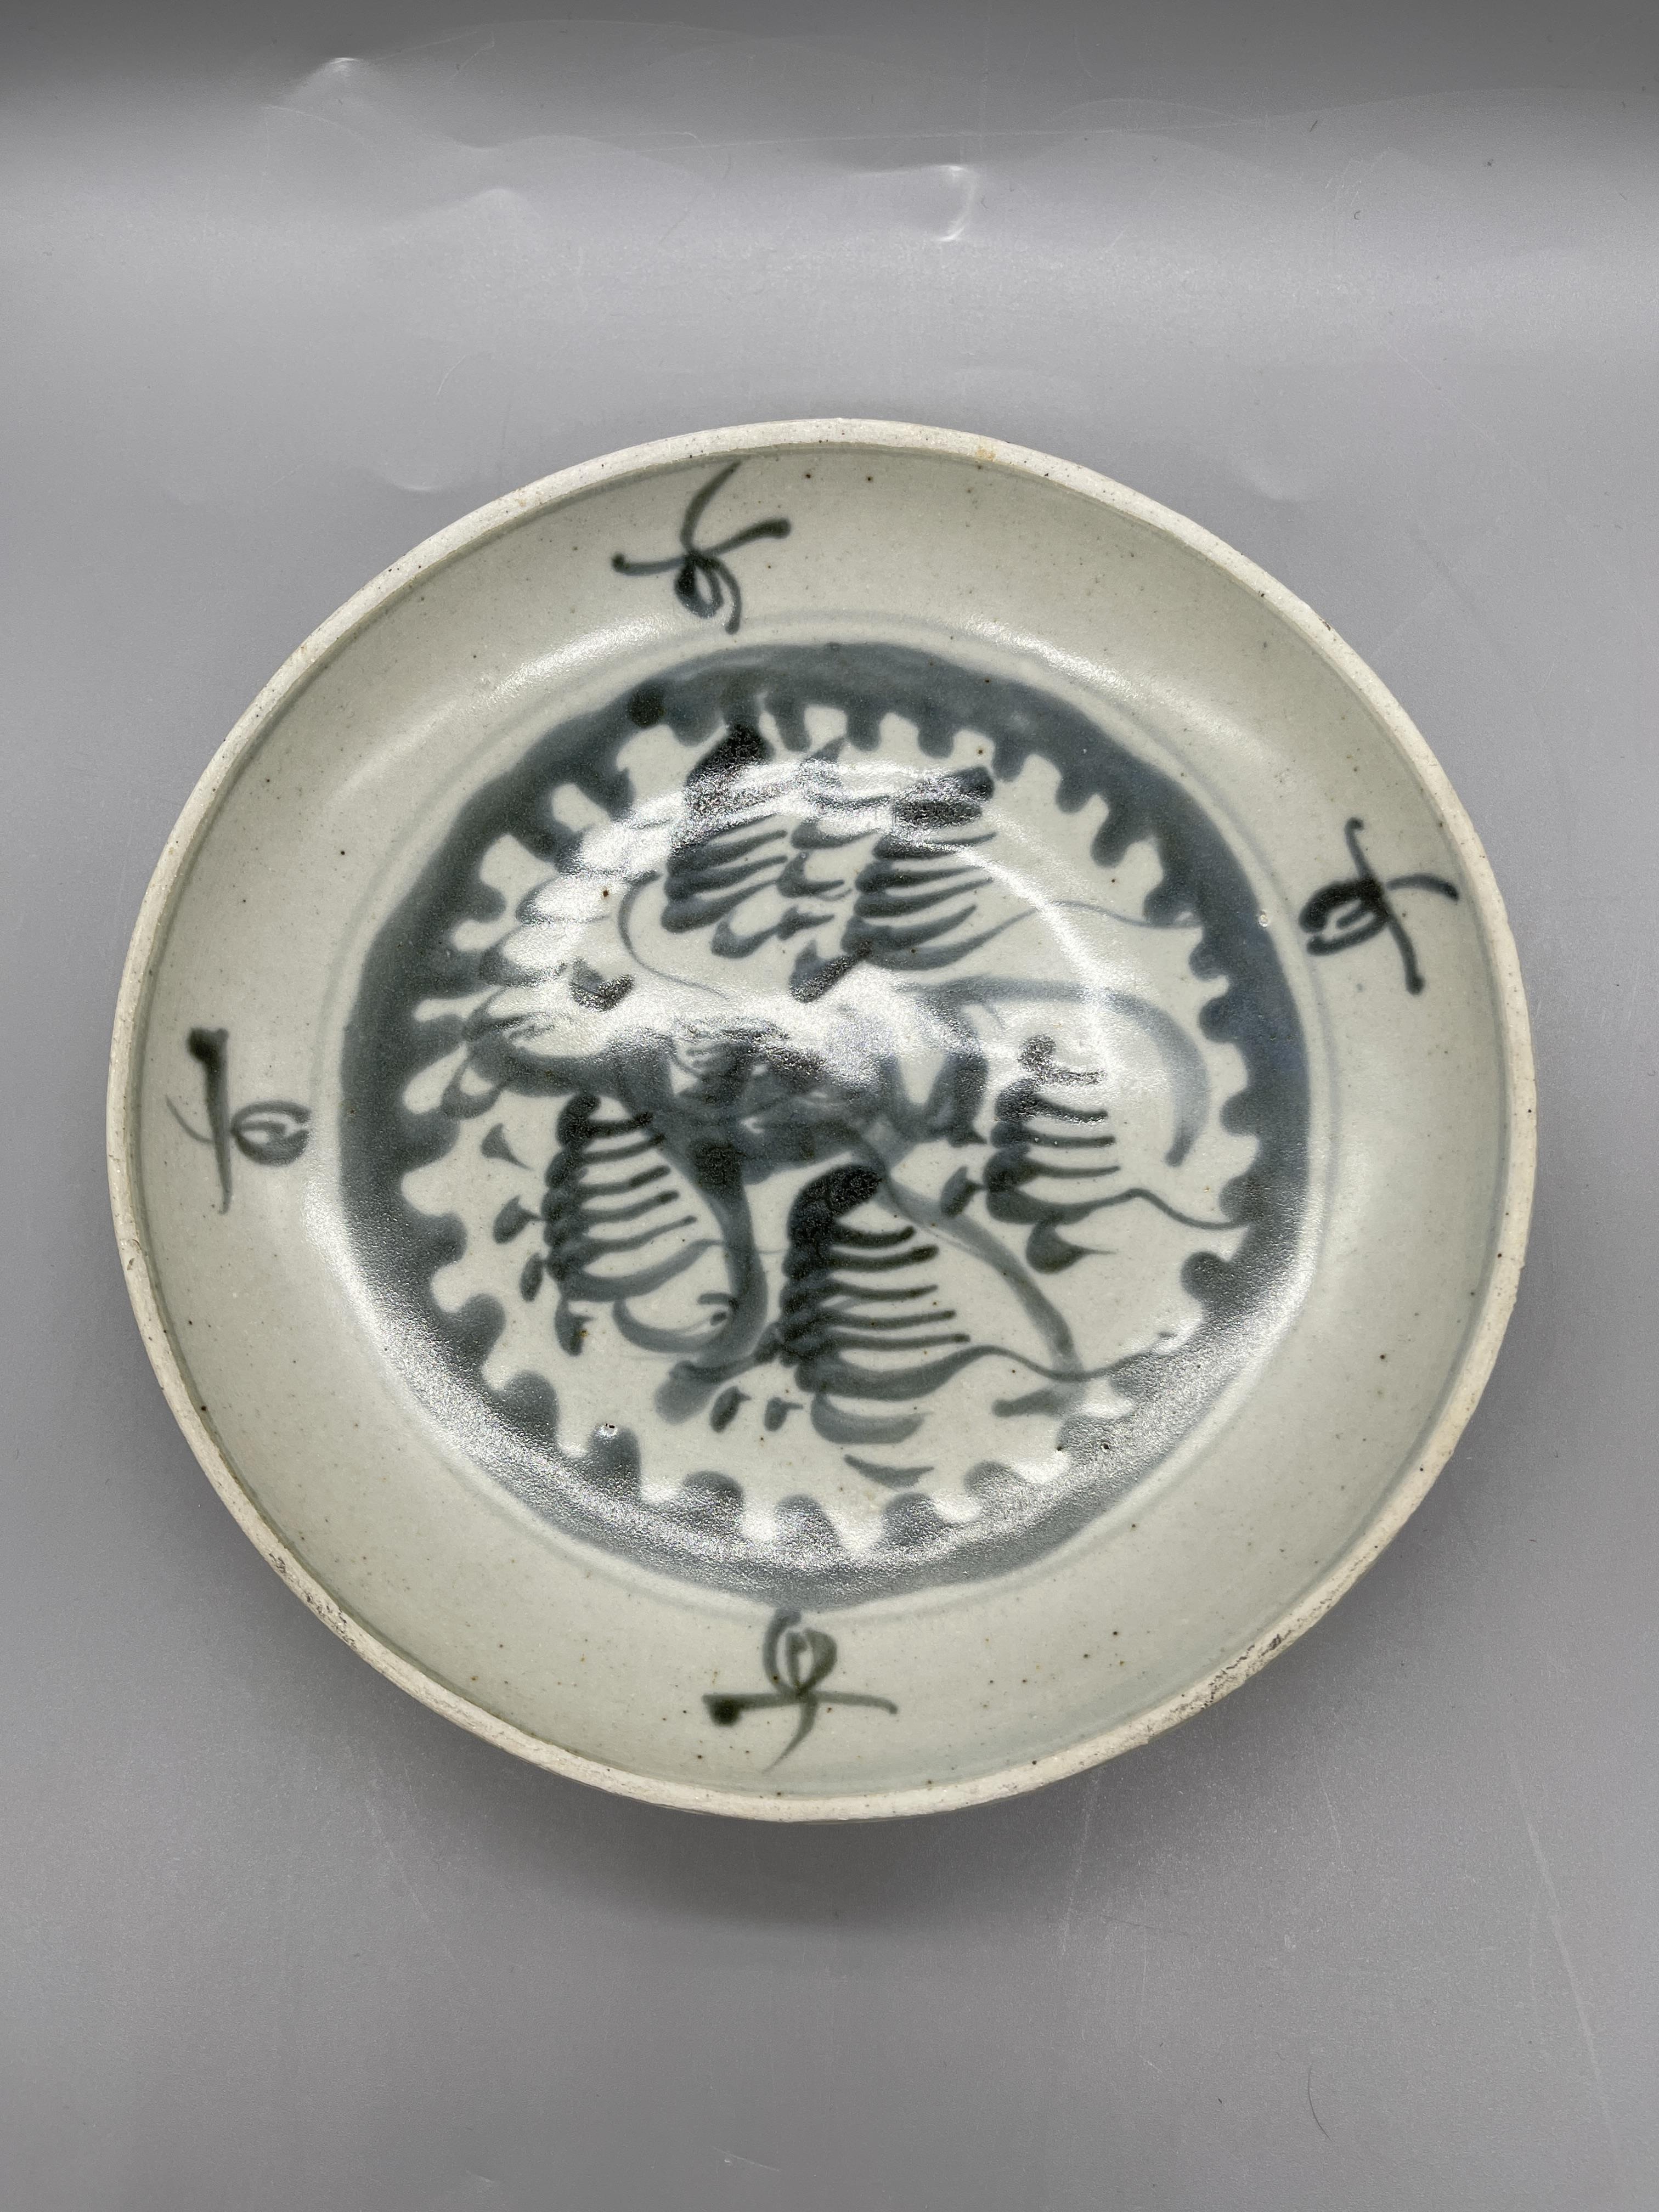 A Chinese export porcelain saucer dish from the Na